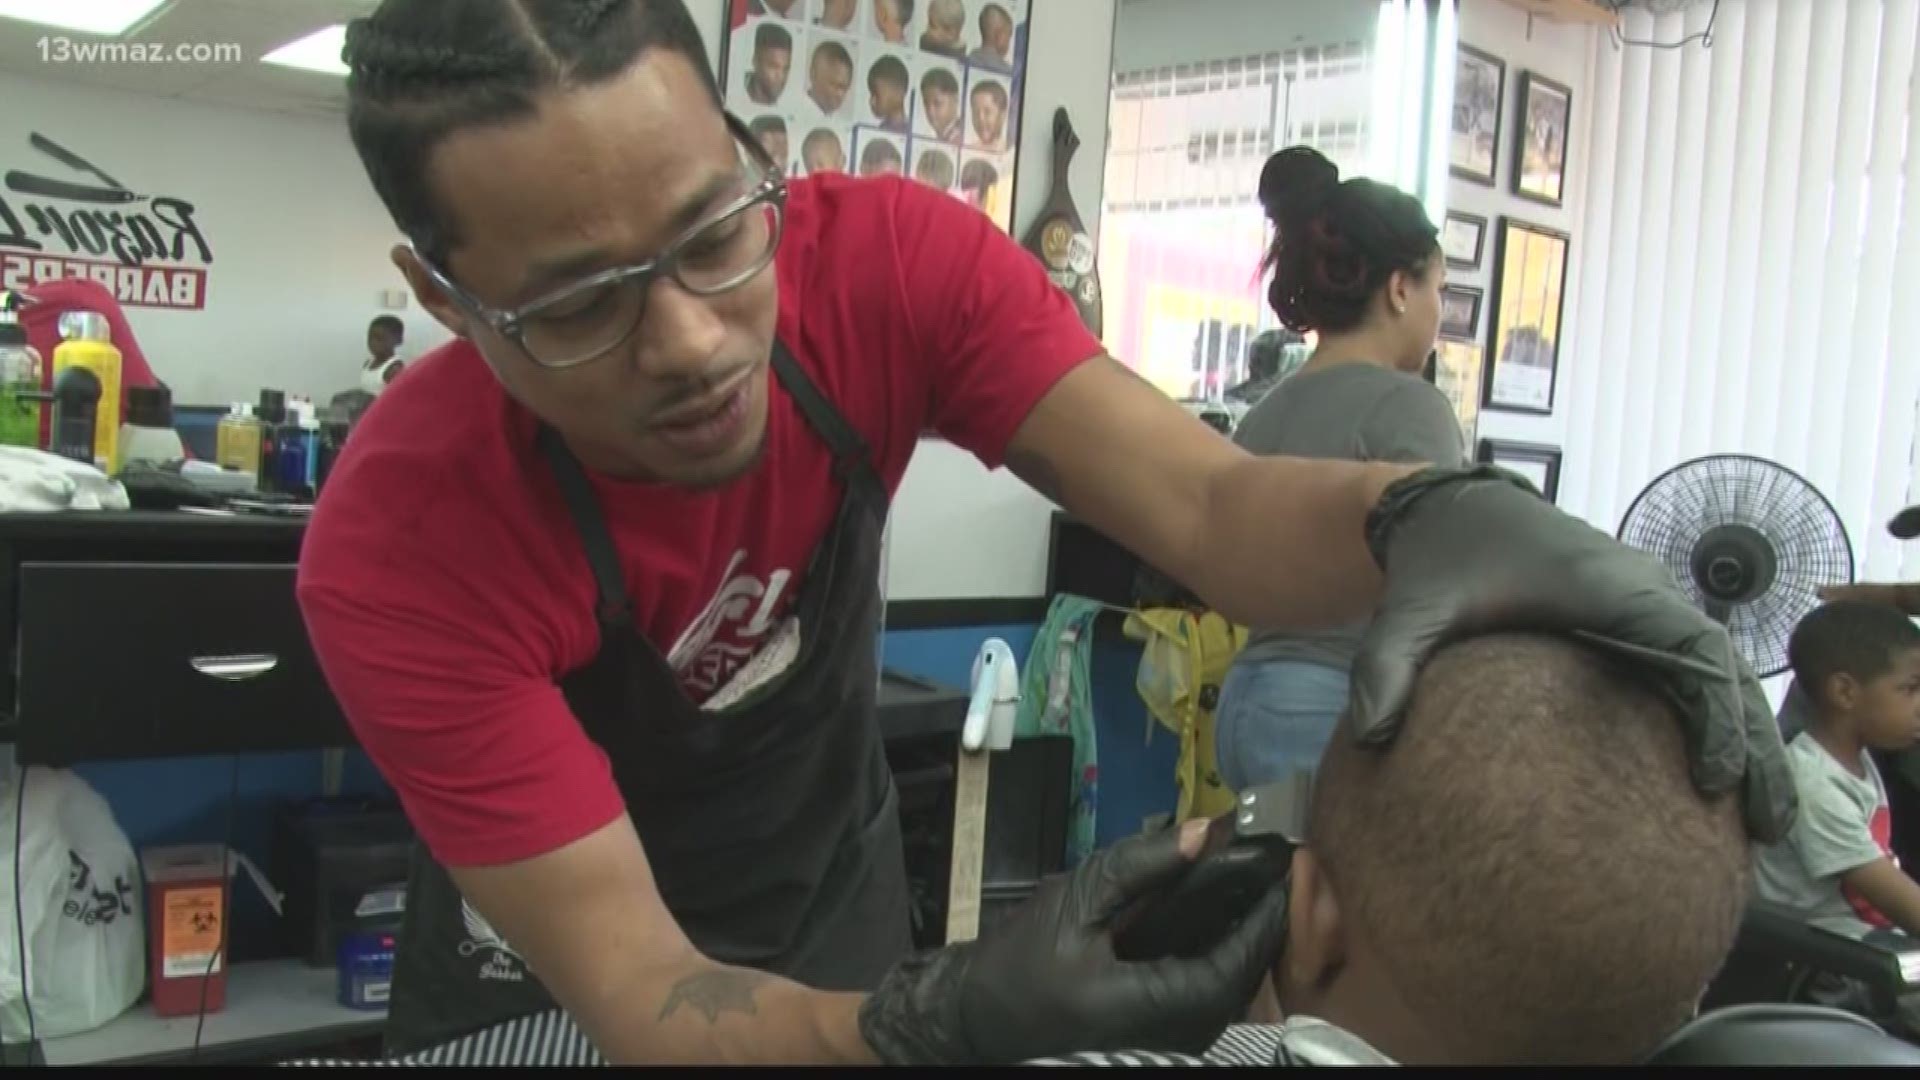 RazorLine Barbershop on Pio Nono Avenue in Macon hosted a back-to-school bash, giving free haircuts, supplies, and confidence to kids heading back to the classroom. This is their second annual bash.